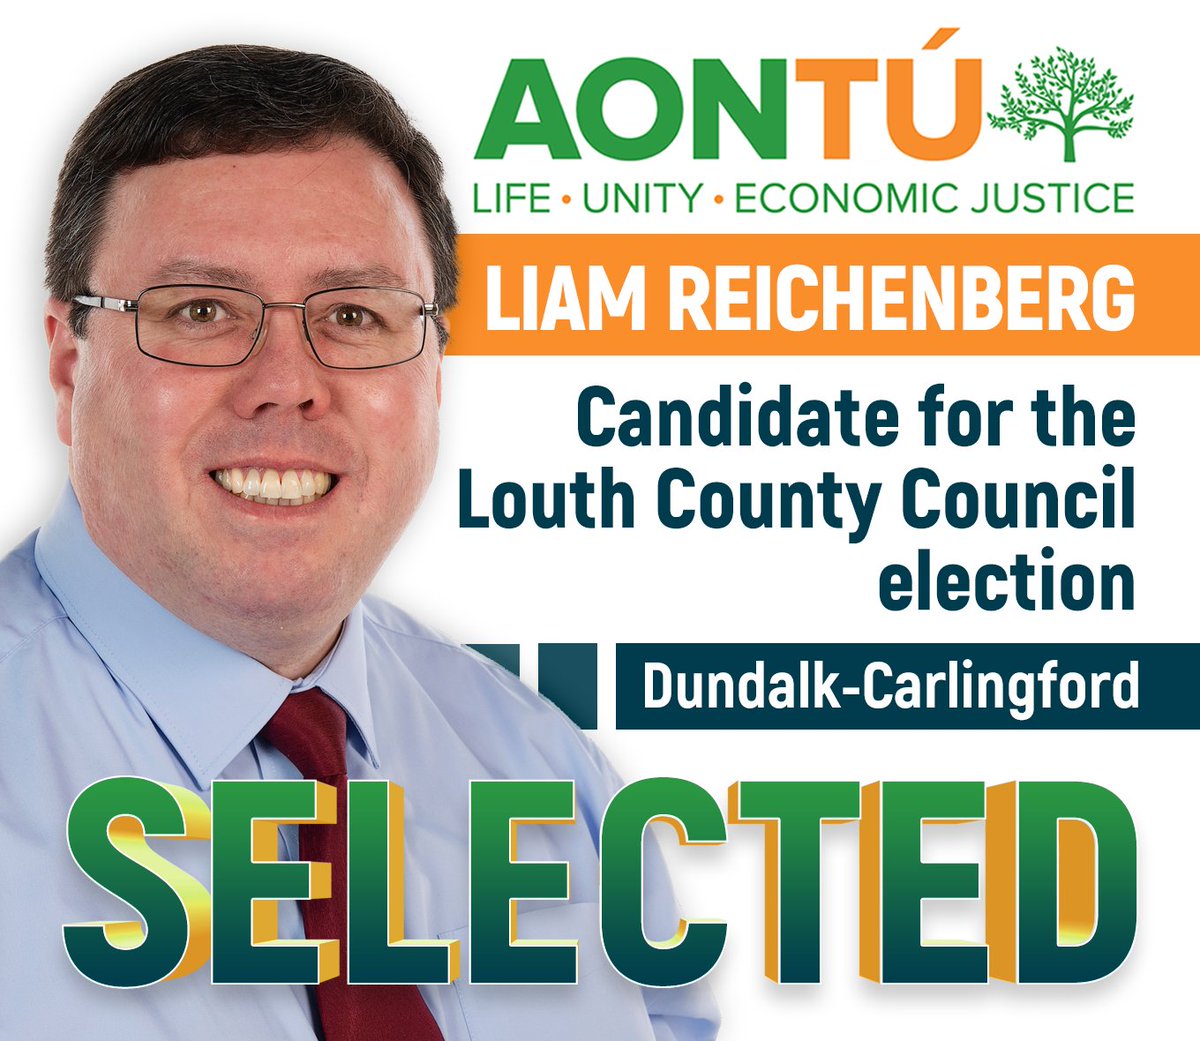 Delighted to announce that Liam Reichenburg will stand in the Dundalk -Carlingford LEA. 

Liam is an incredible worker and has worked in Dundalk for decades. 

Get behind his campaign. Join us on aontu.ie/membership/